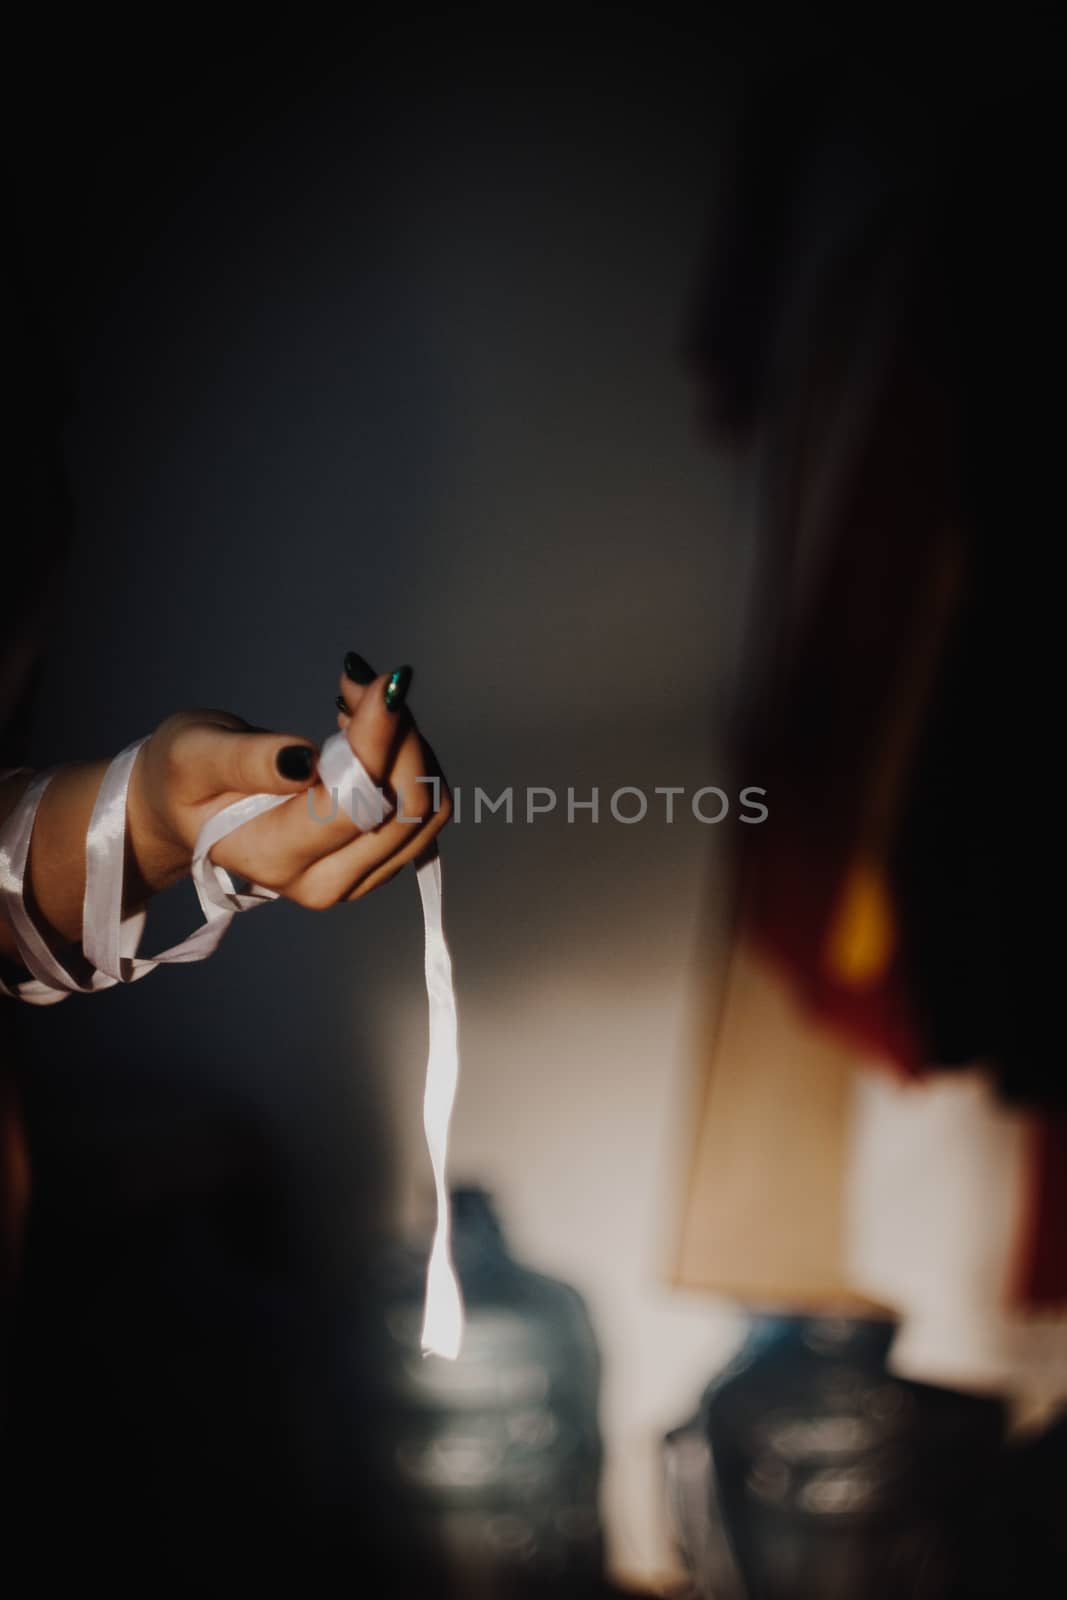 tied hands with white ribbon isolated on black background highlighted with light by yulaphotographer